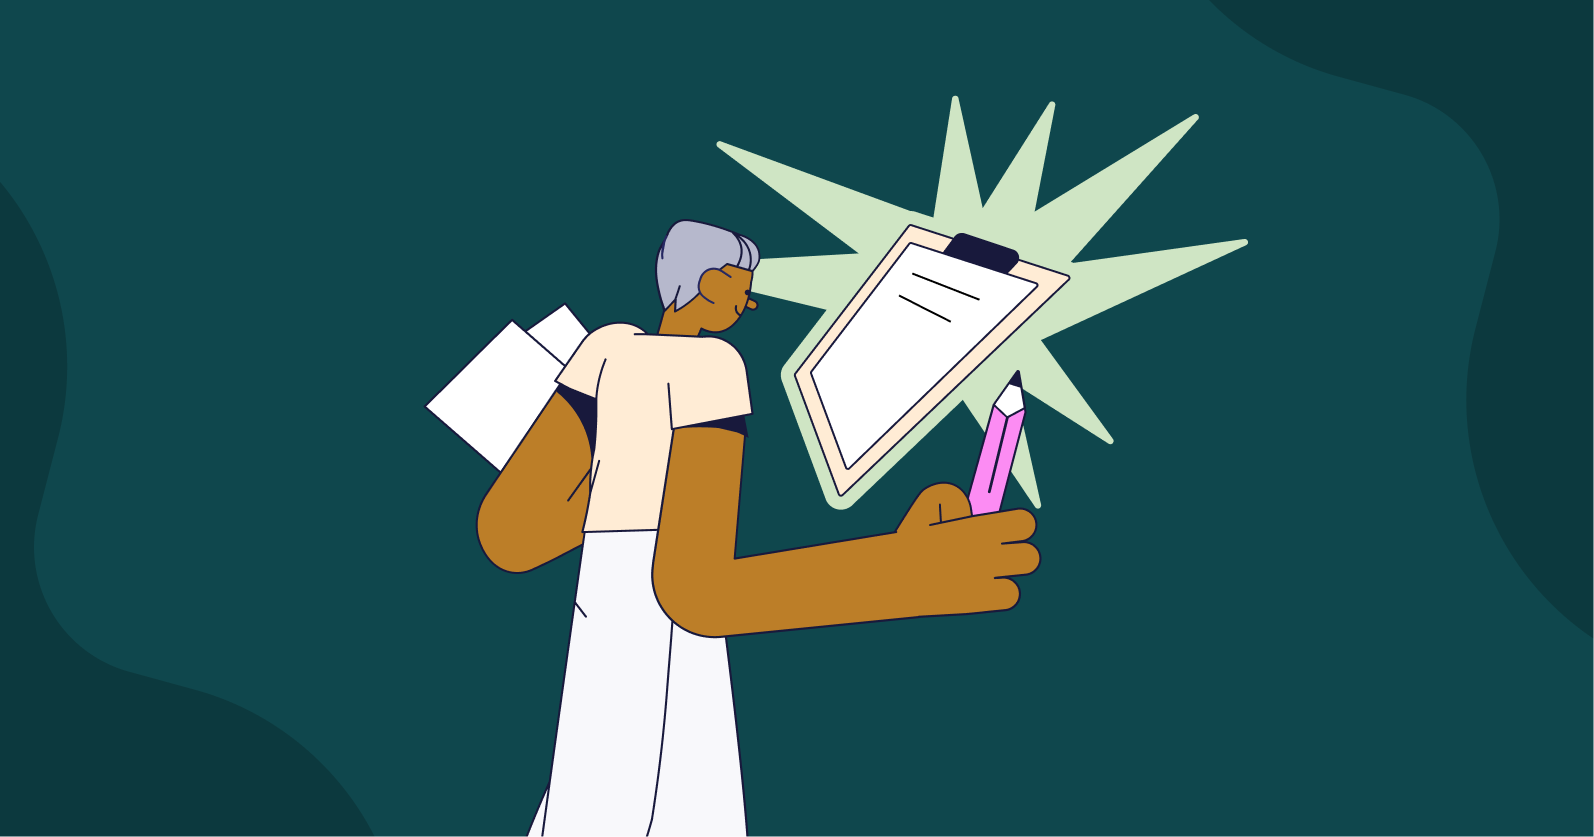 Illustration of a person with a clipboard and holding a pencil.